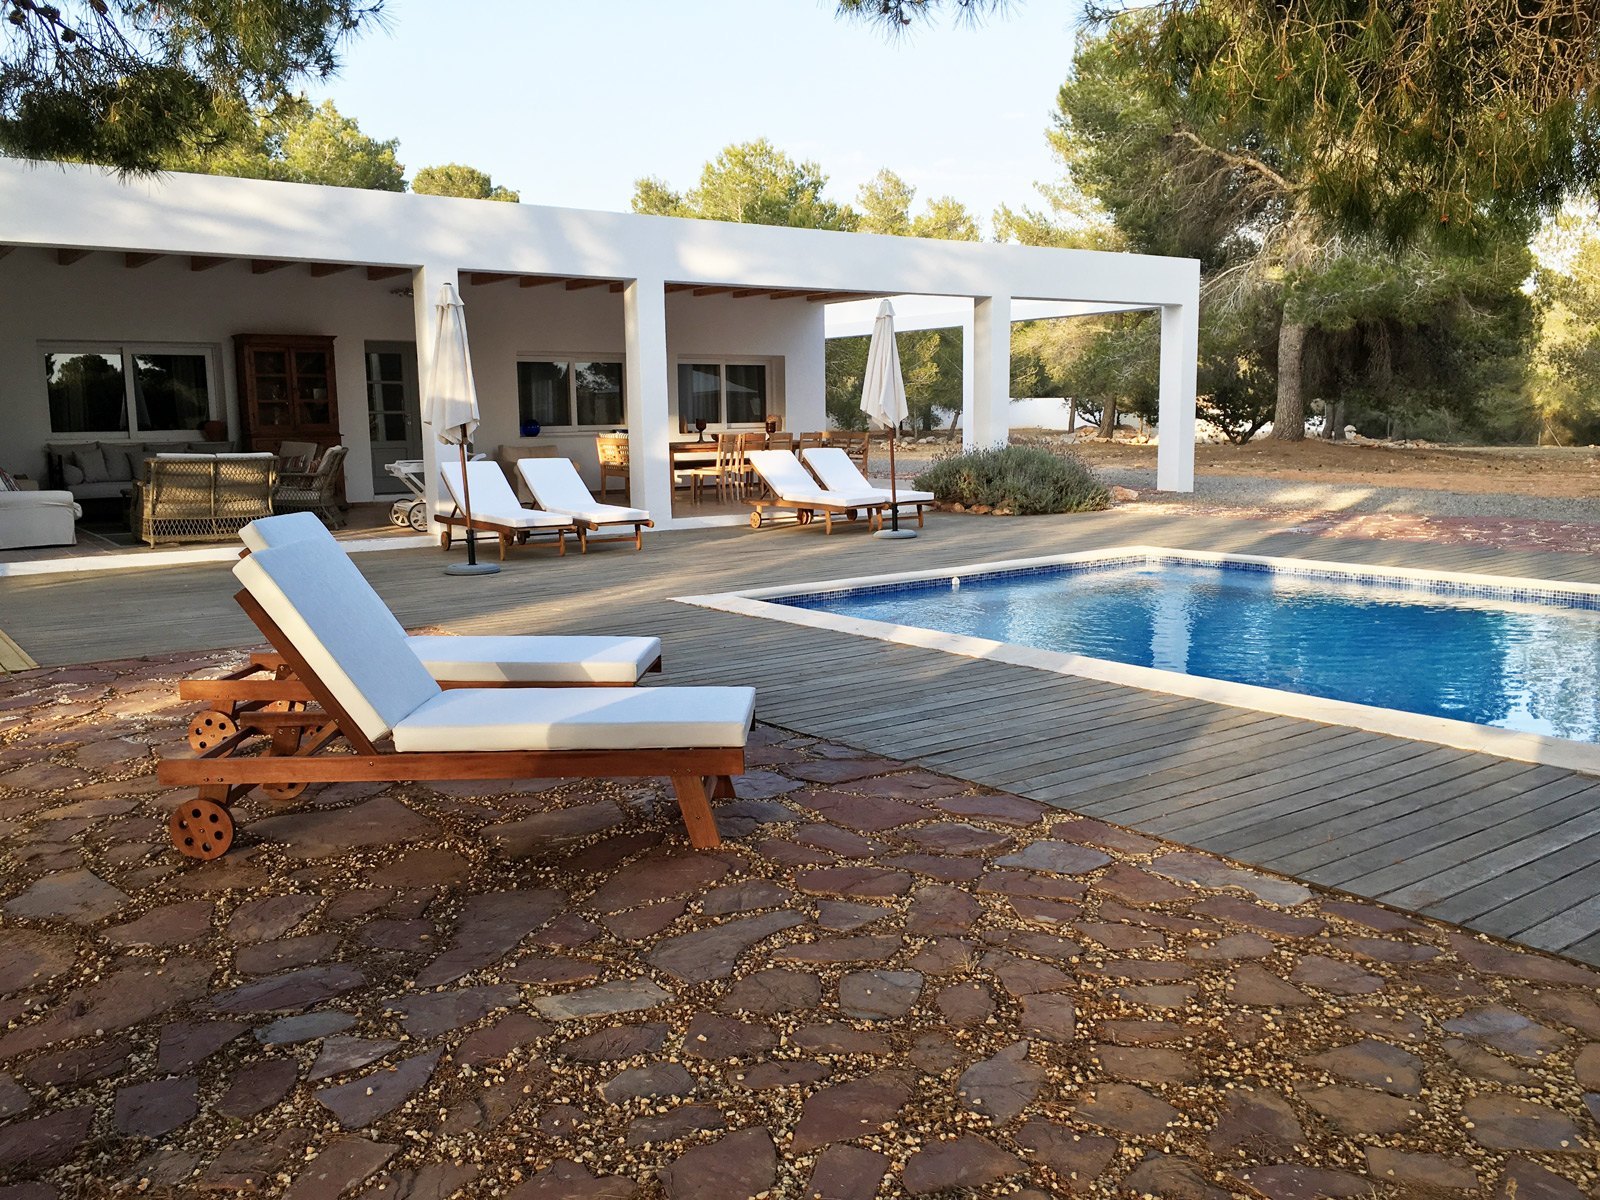 Beautiful country house surrounded by trees close to Cala Jondal